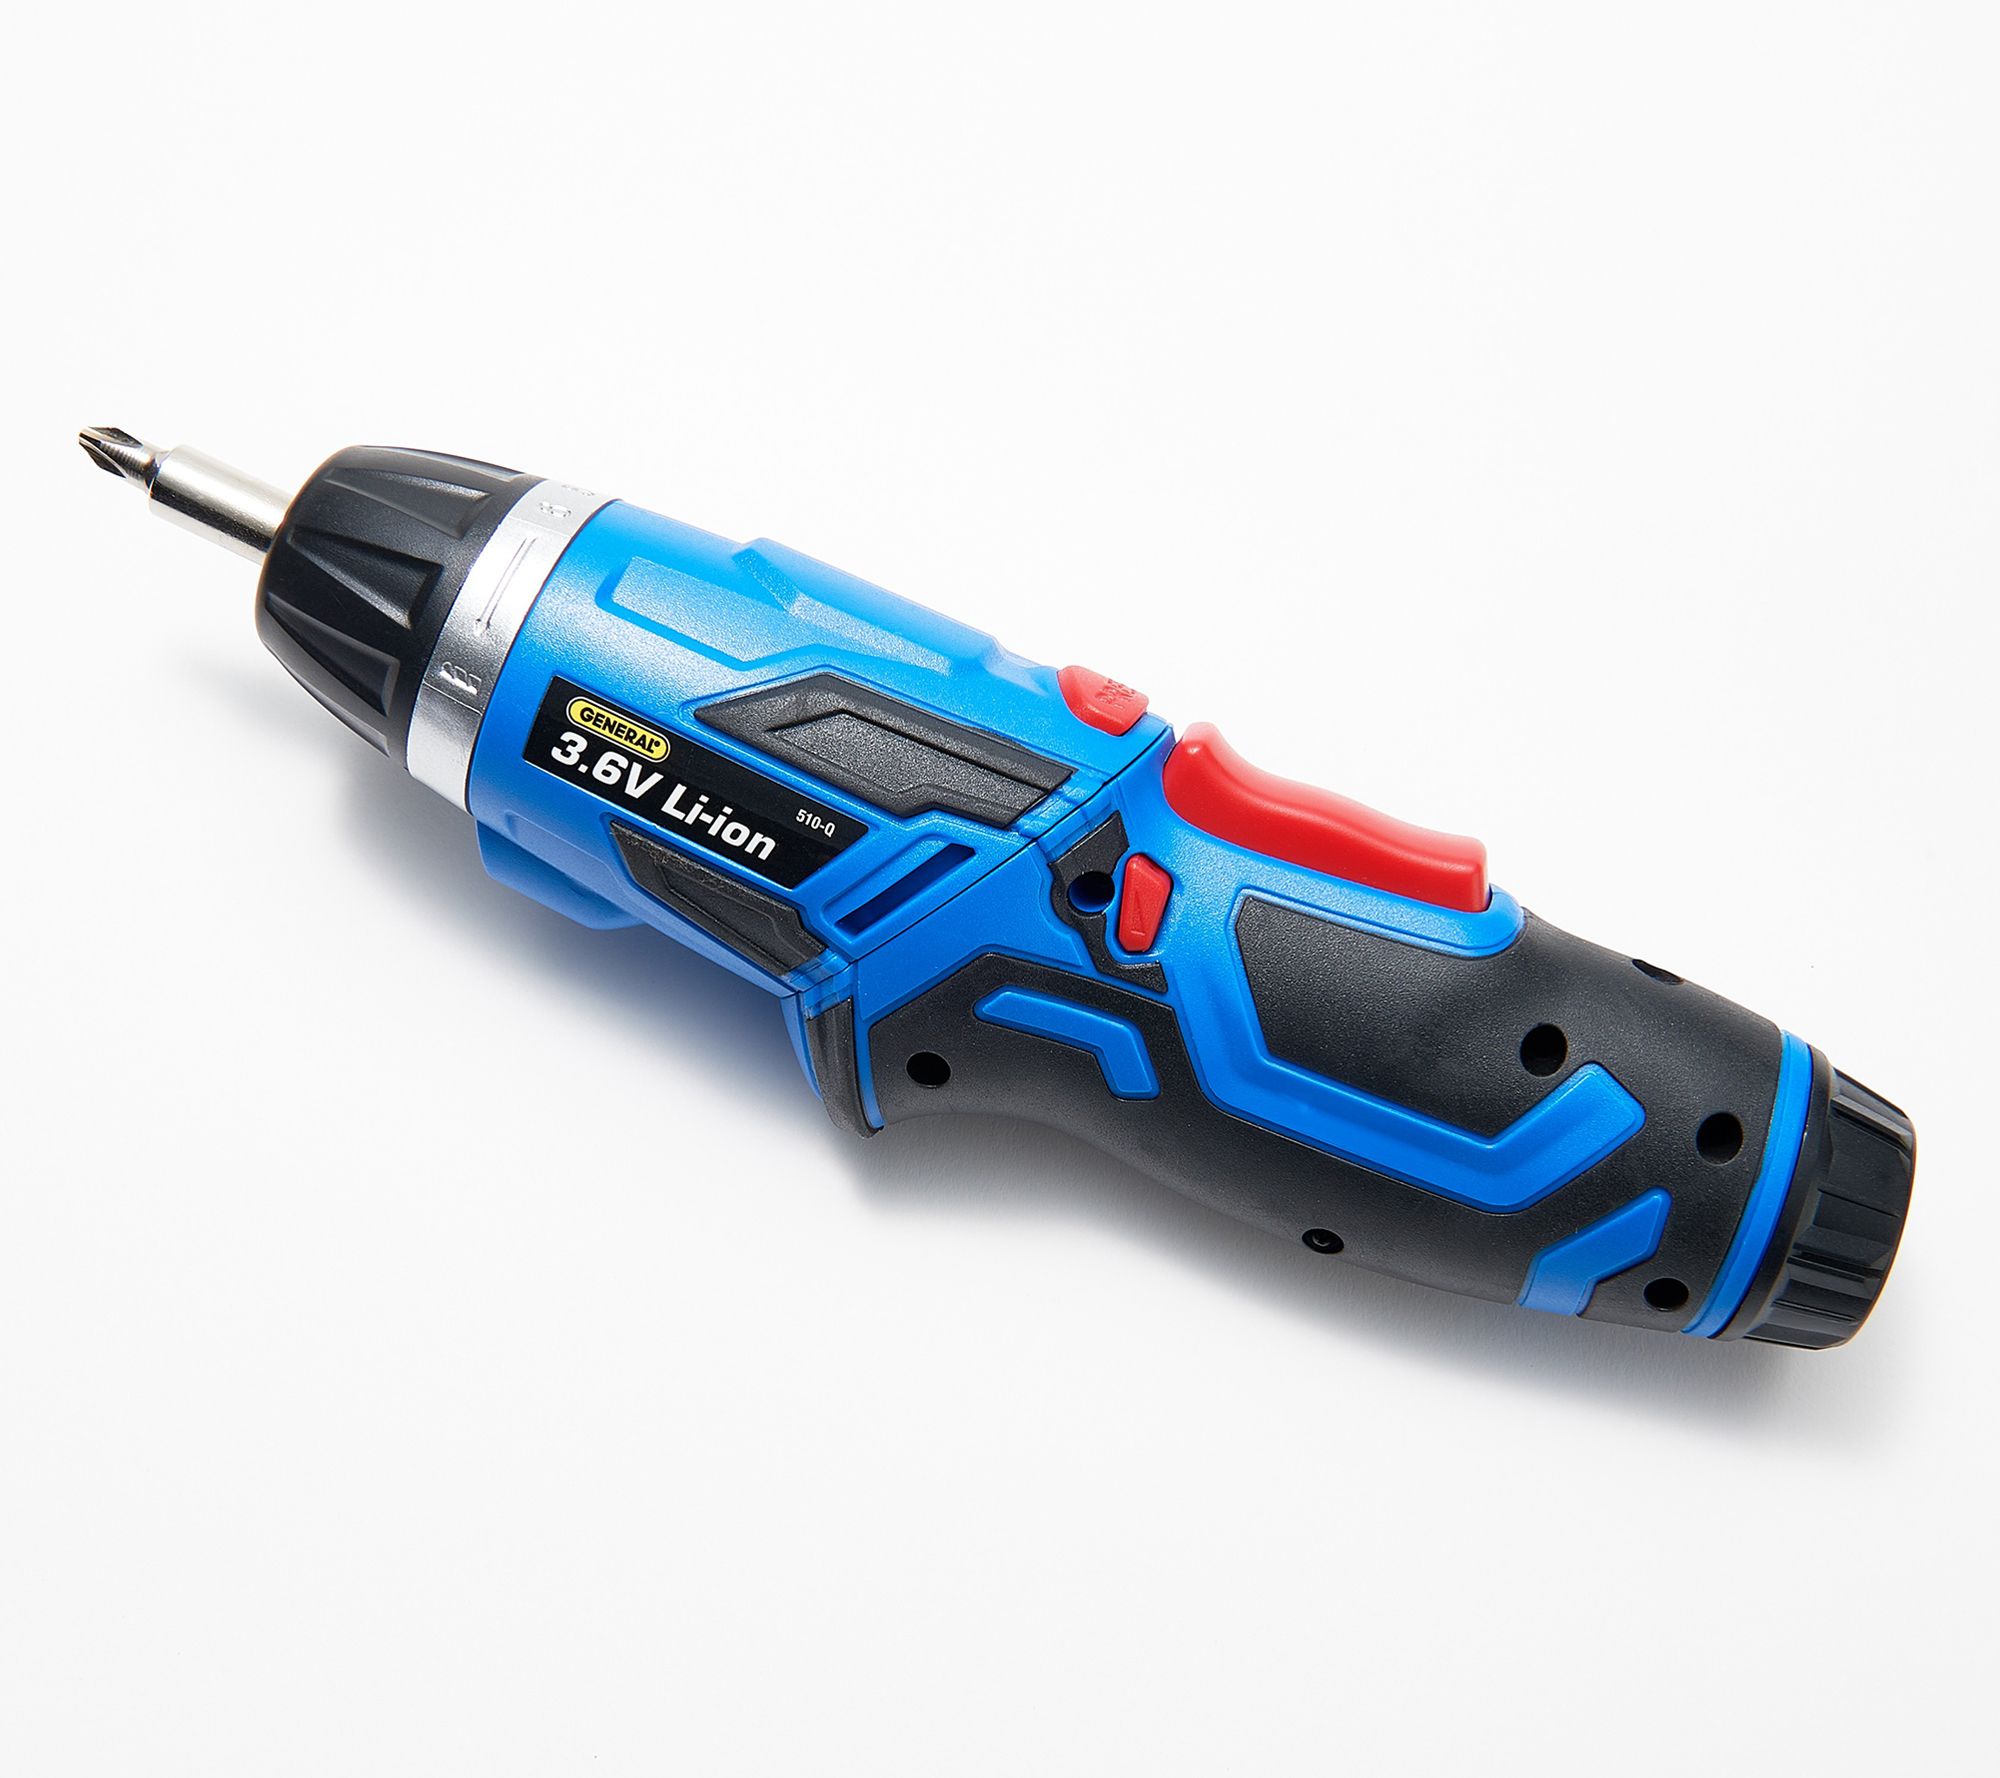 SUPER Screwdriver 3 Way Angled Head WITH 10 Bits = Can Be Used With Drill